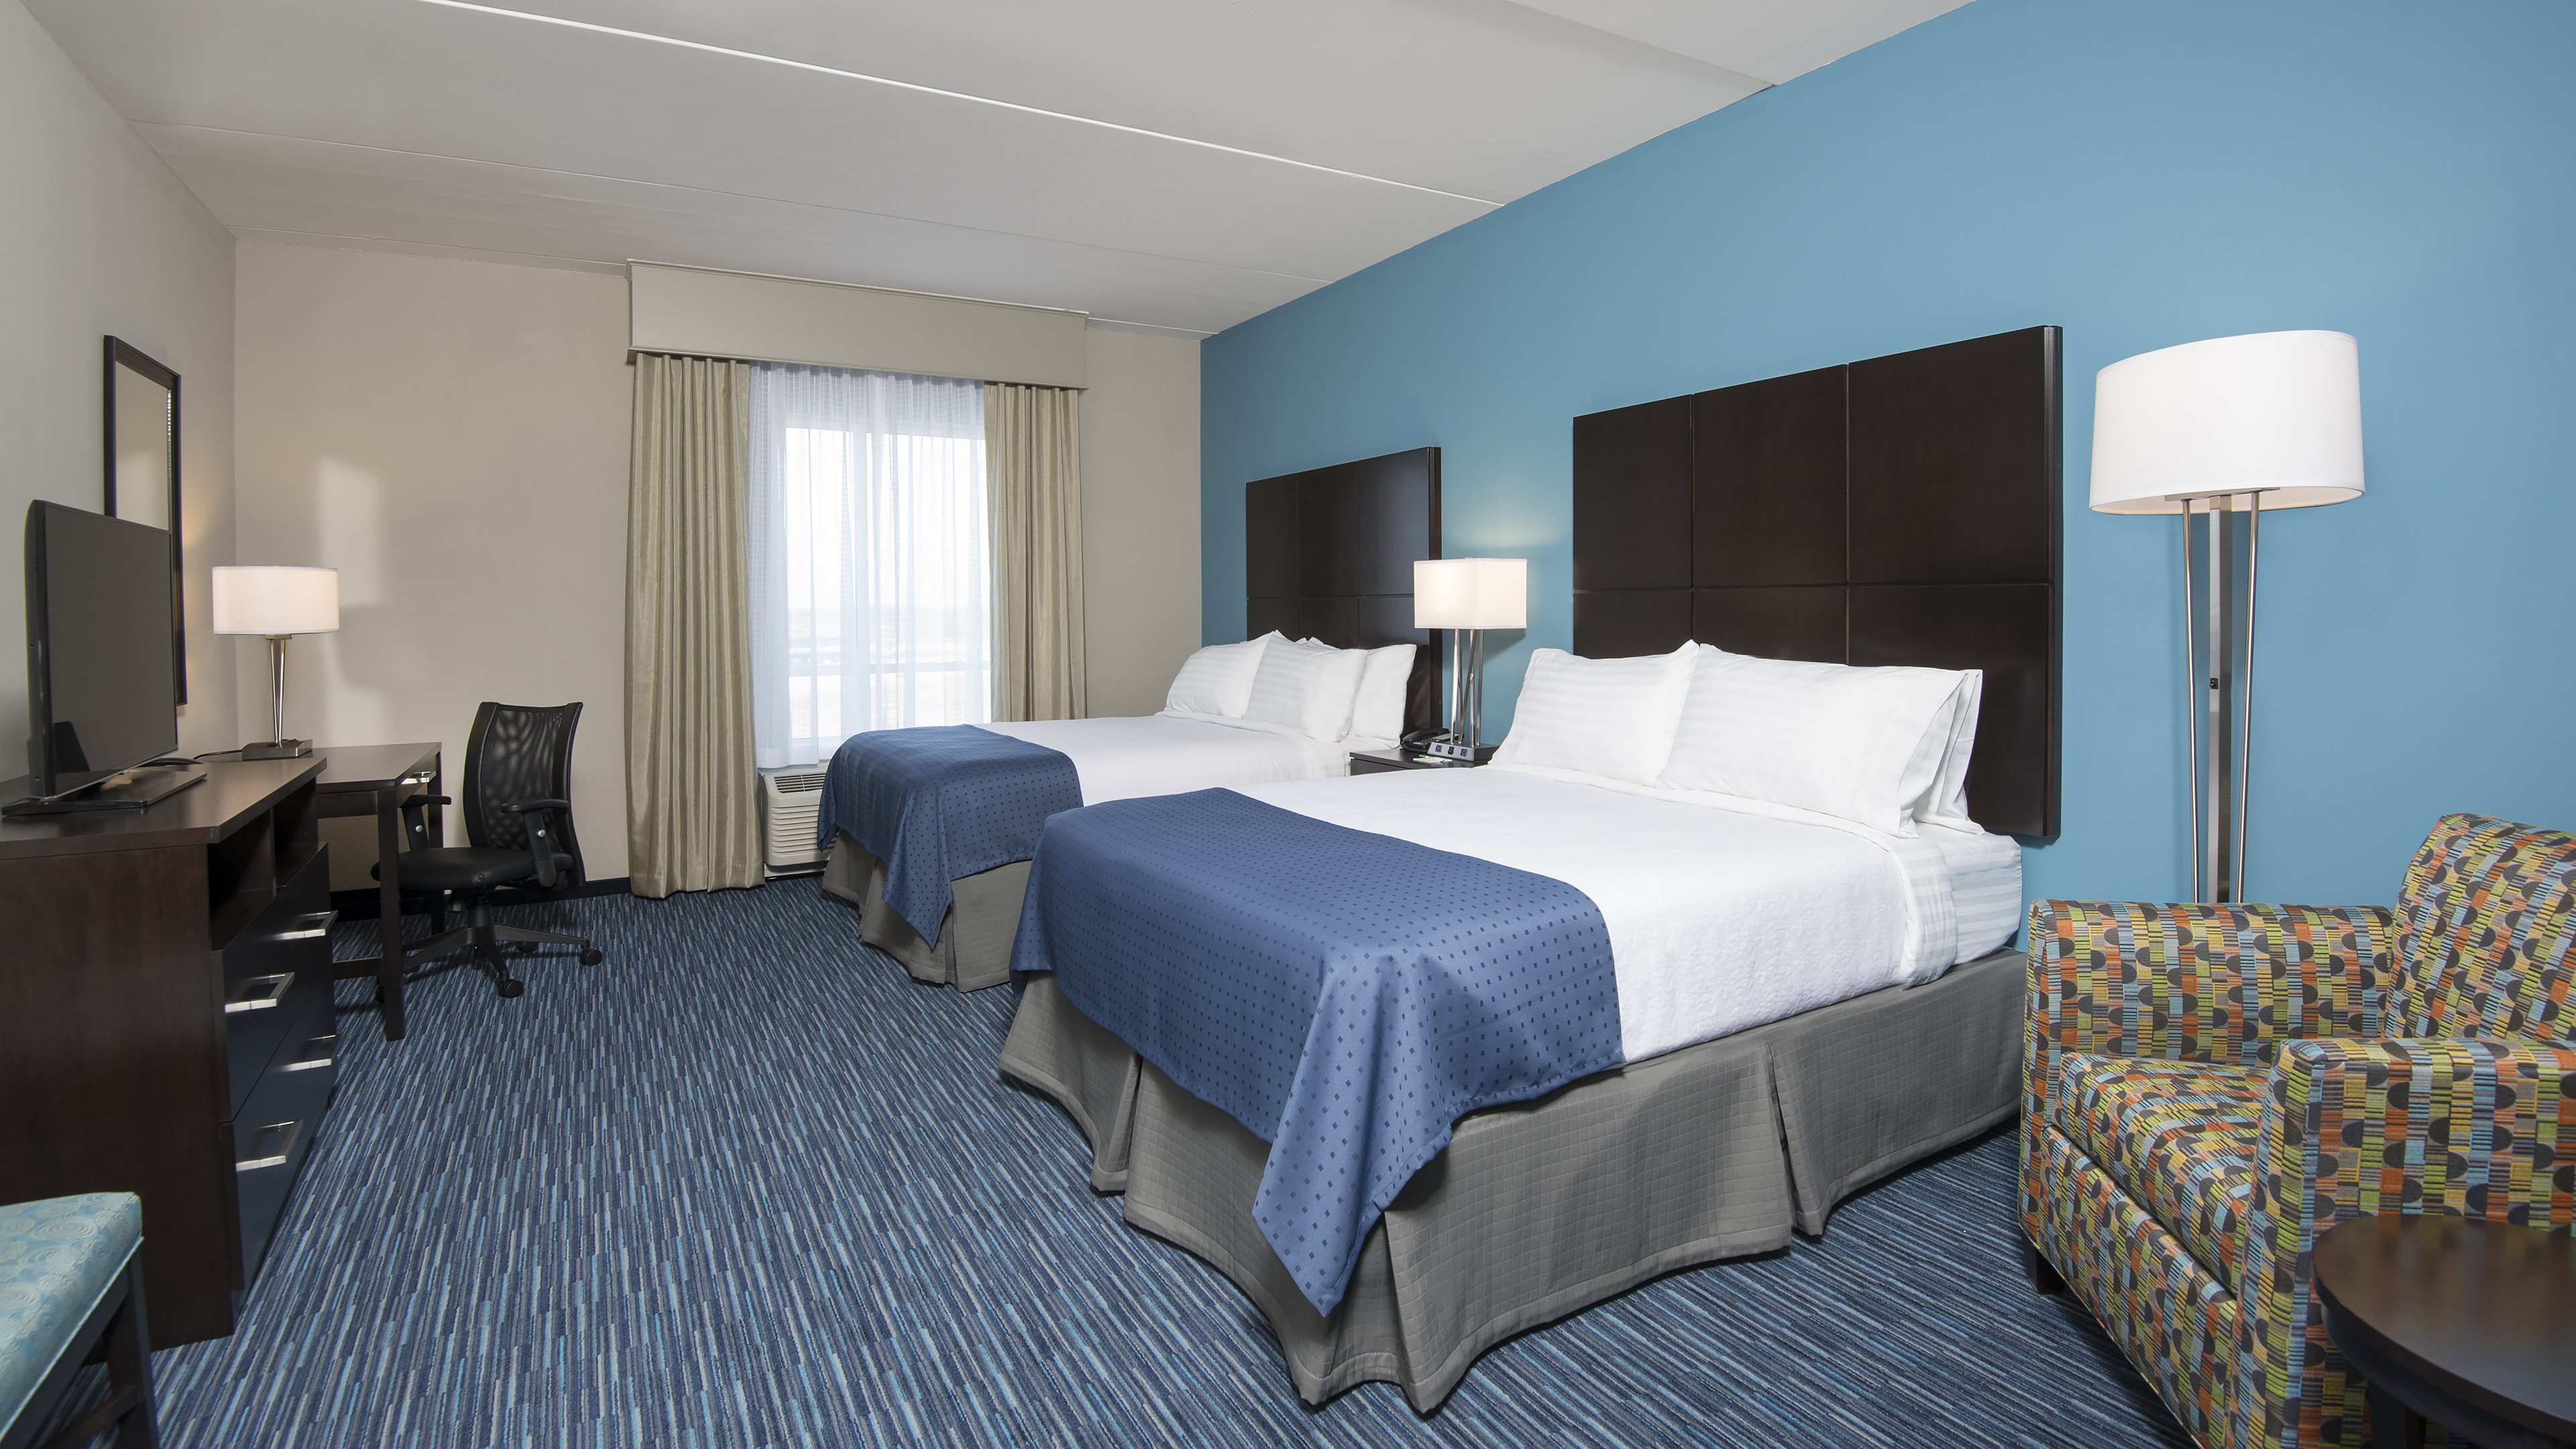 Double Queen Guestroom, perfect for families traveling.